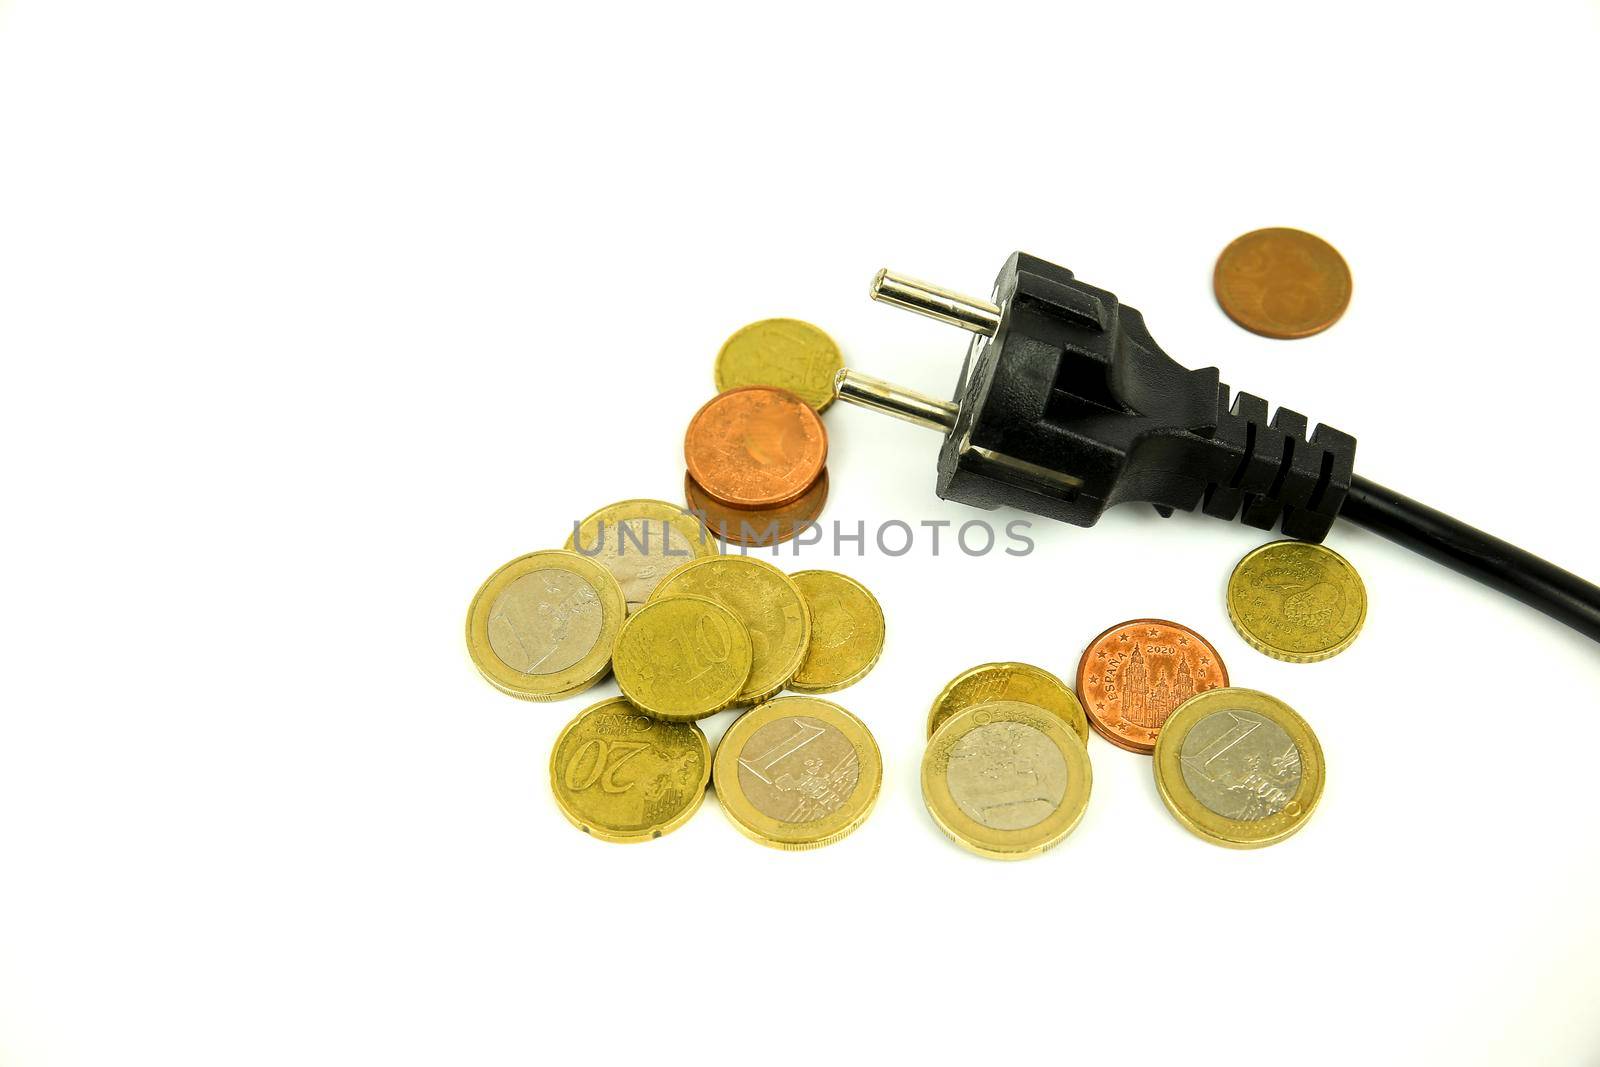 Black pin power plug and coins on white background